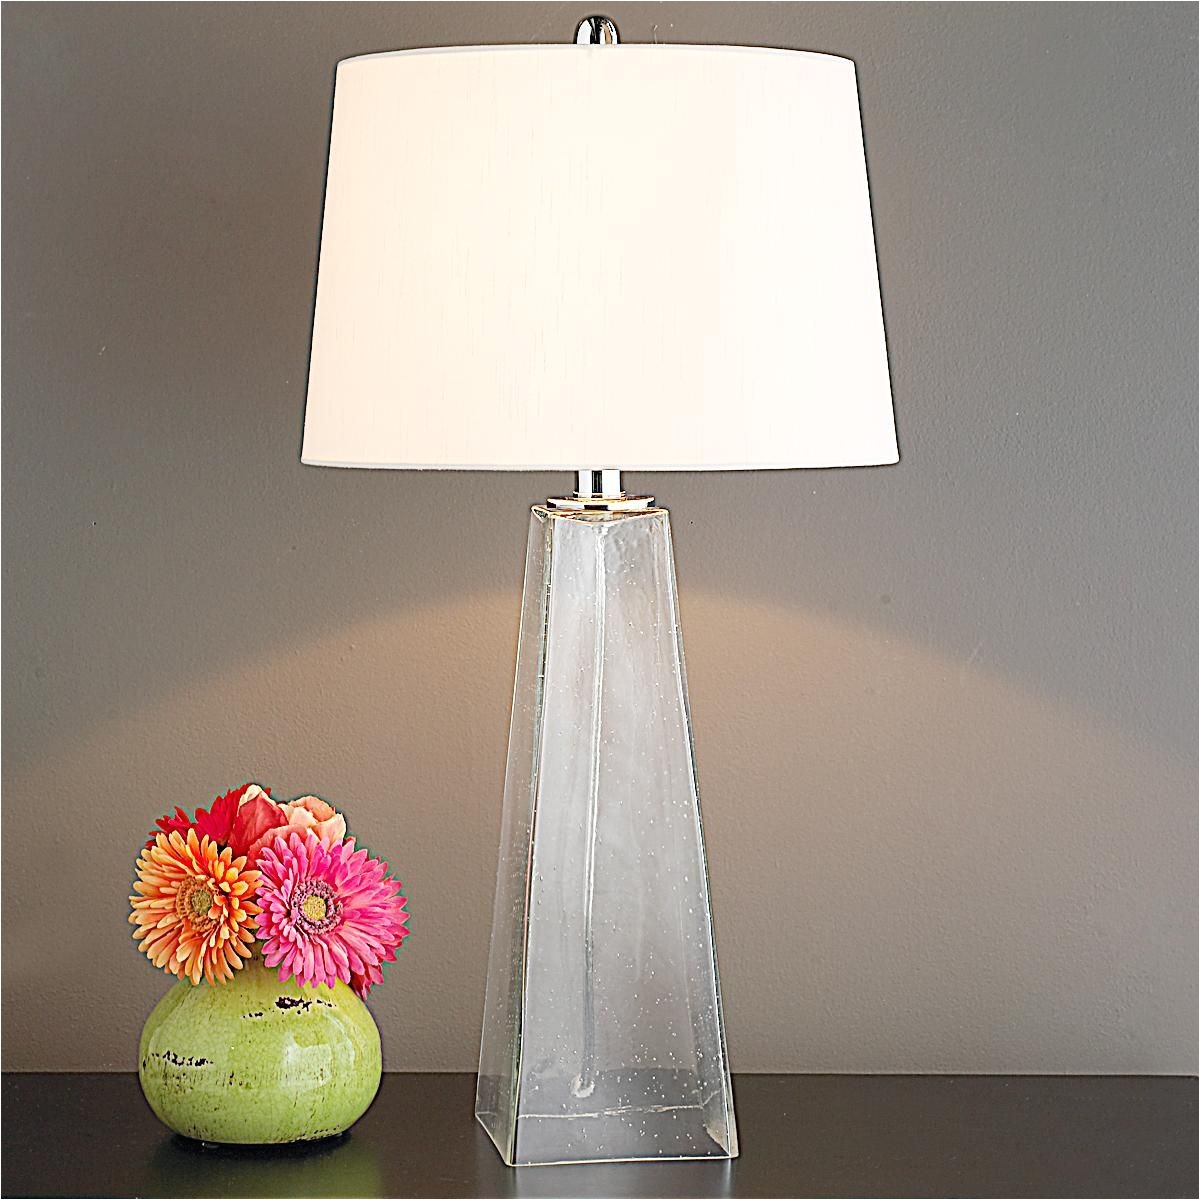 Seeded Glass Pyramid Table Lamp $219 Taller for a better angle on the light and also would take up less table space